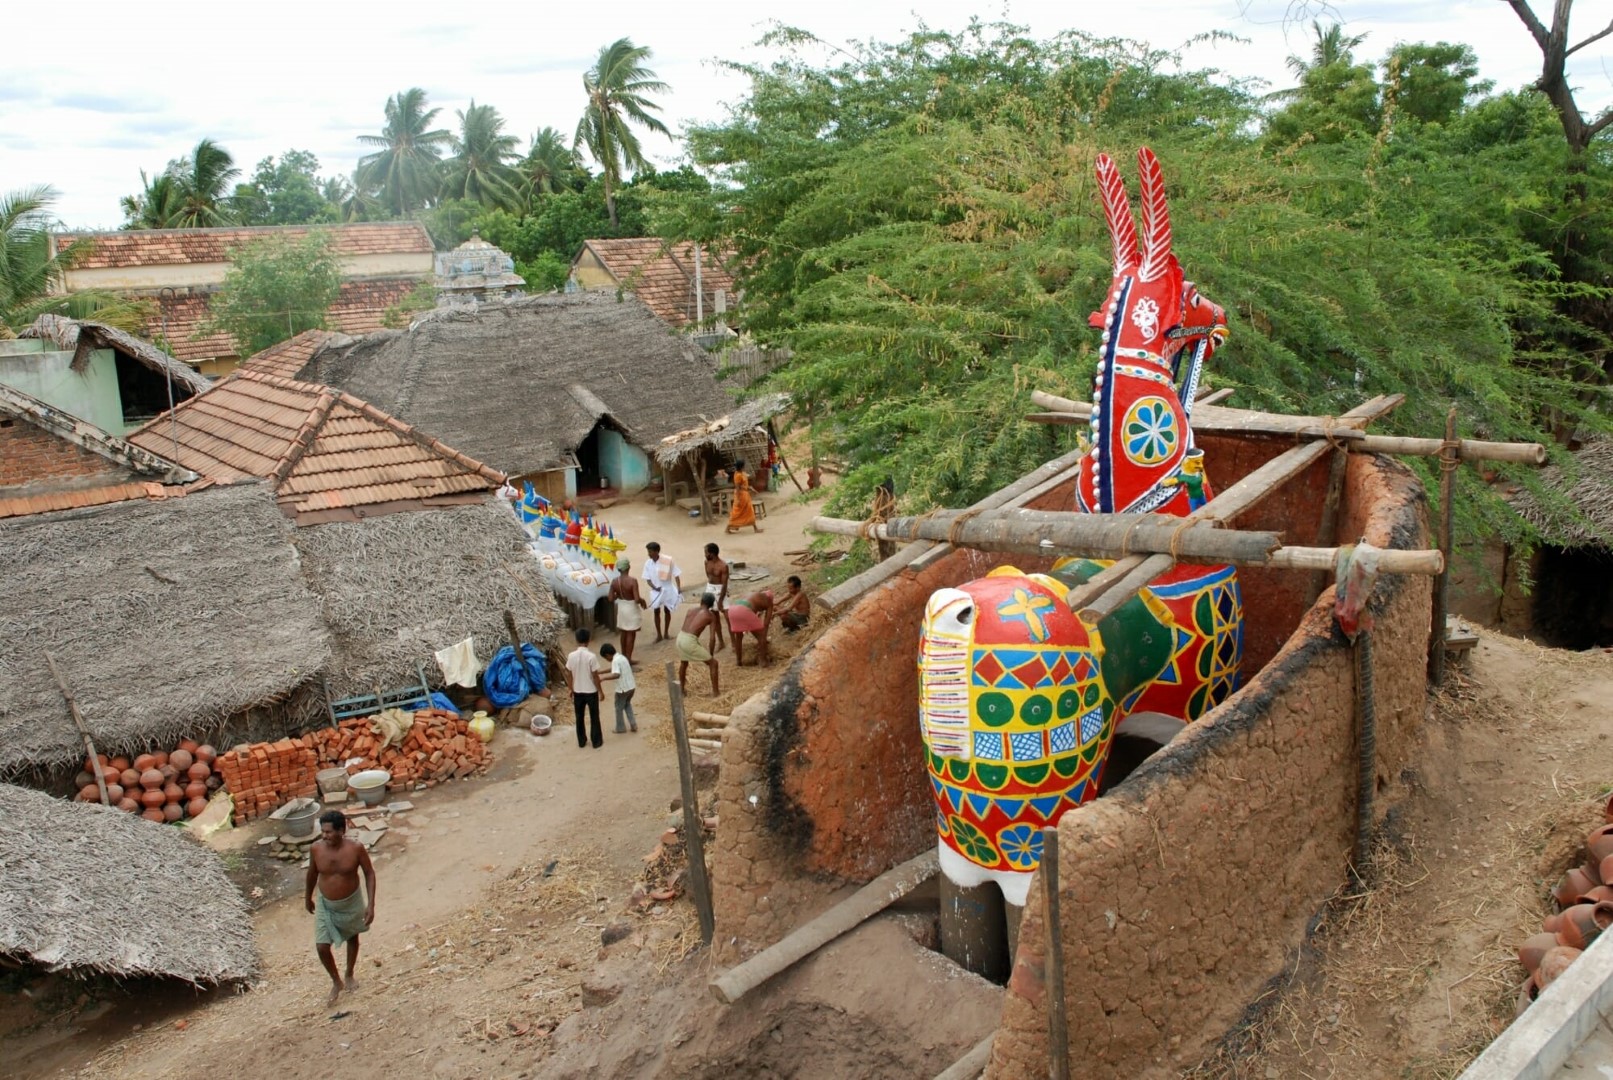 <span style="font-weight:normal;">The morning of the Kuthadivayal festival in Aranthangi. The 6-metre-high <i>ure-kuthirai</i> (village horse) was created, fired and painted inside the oven. This afternoon, it will be decorated, lifted out of the oven and carried from the village directly to the shrine, five kilometres away.</span>